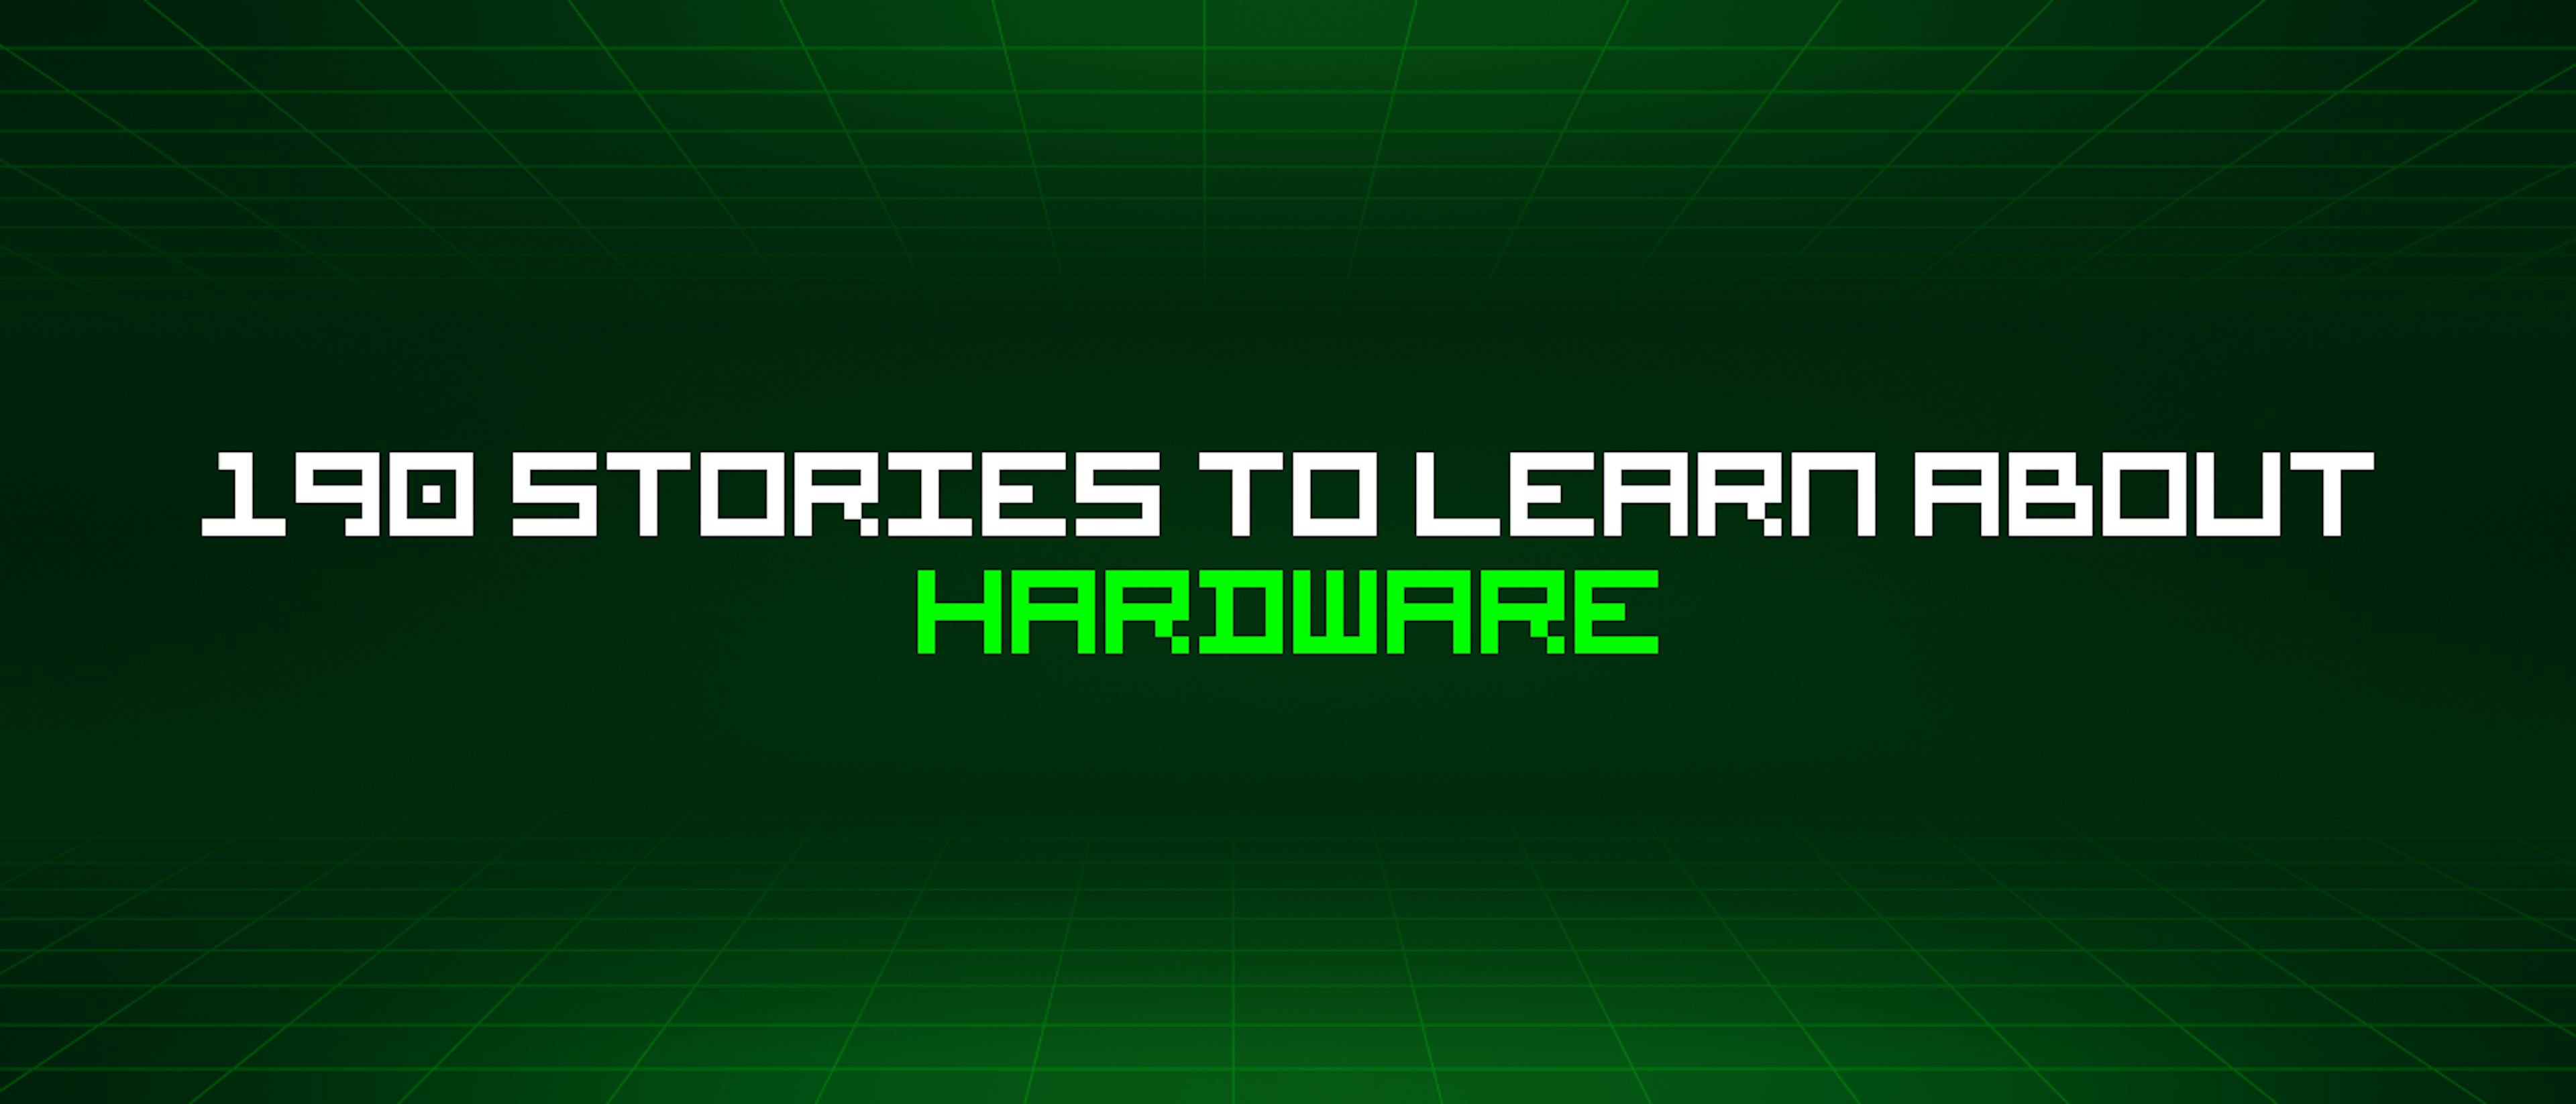 featured image - 190 Stories To Learn About Hardware